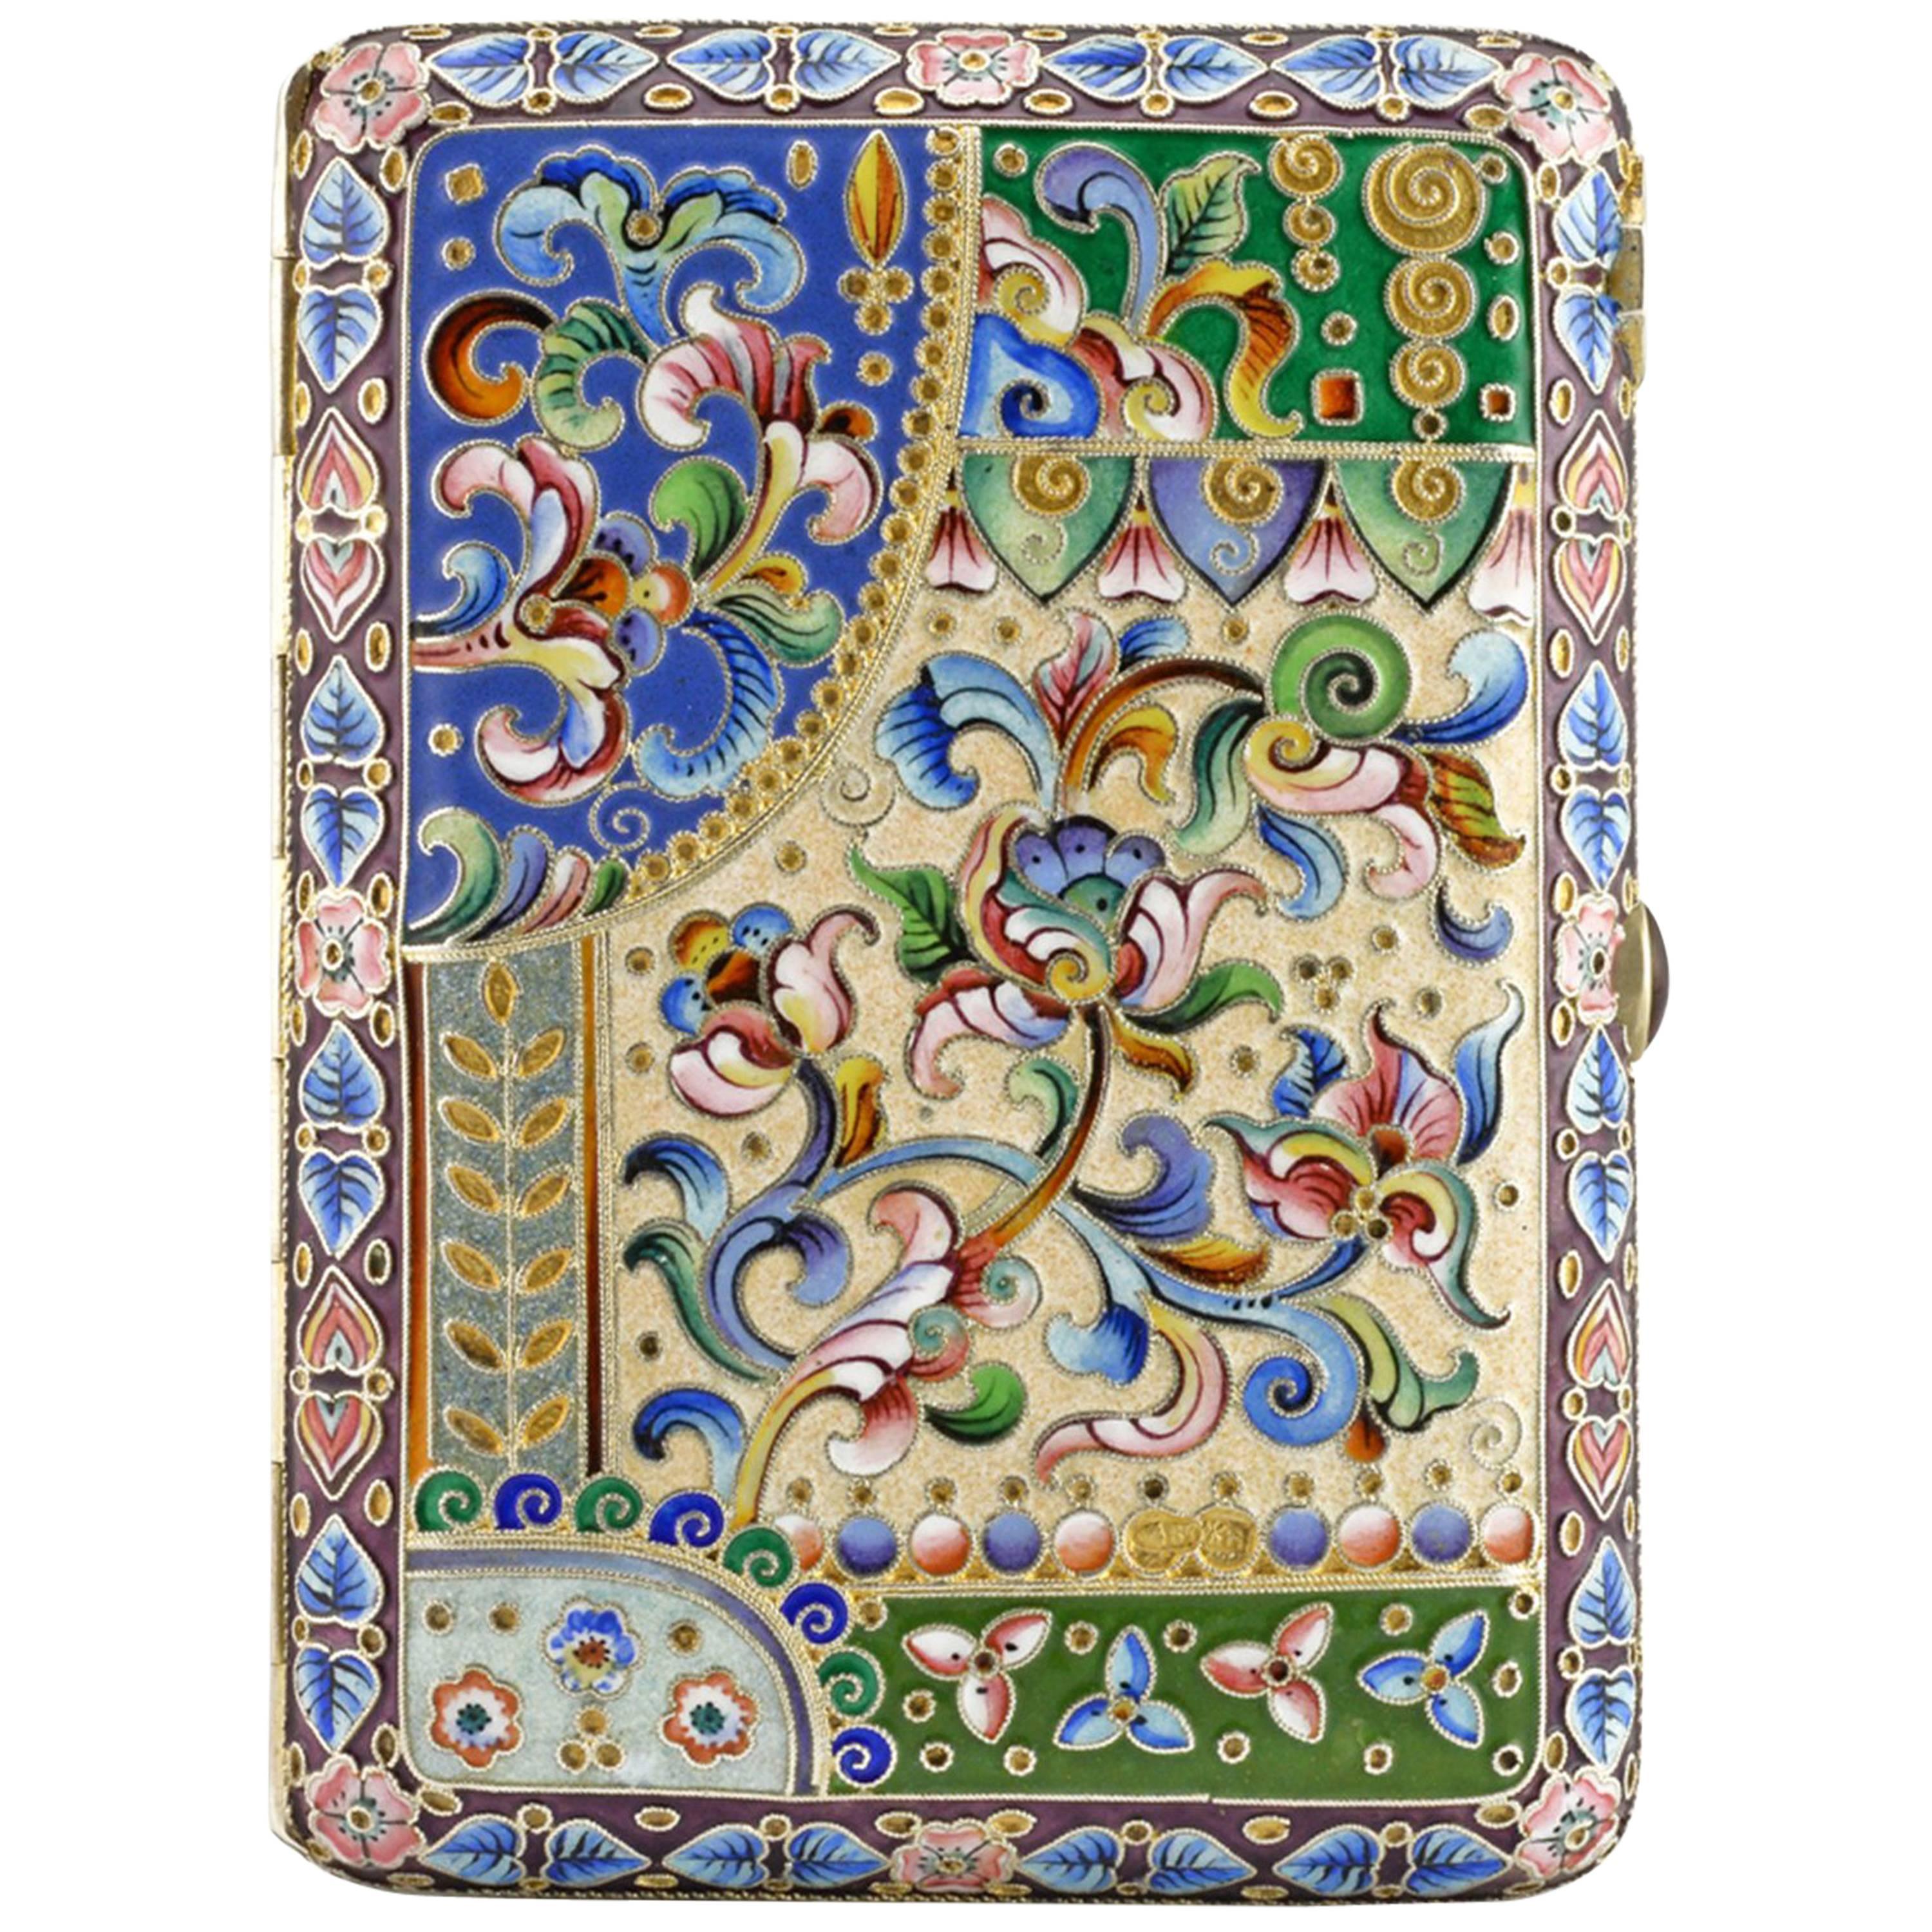 Russian Antique Silver and Shaded Cloisonné Enamel Cigarette Case with Tulips